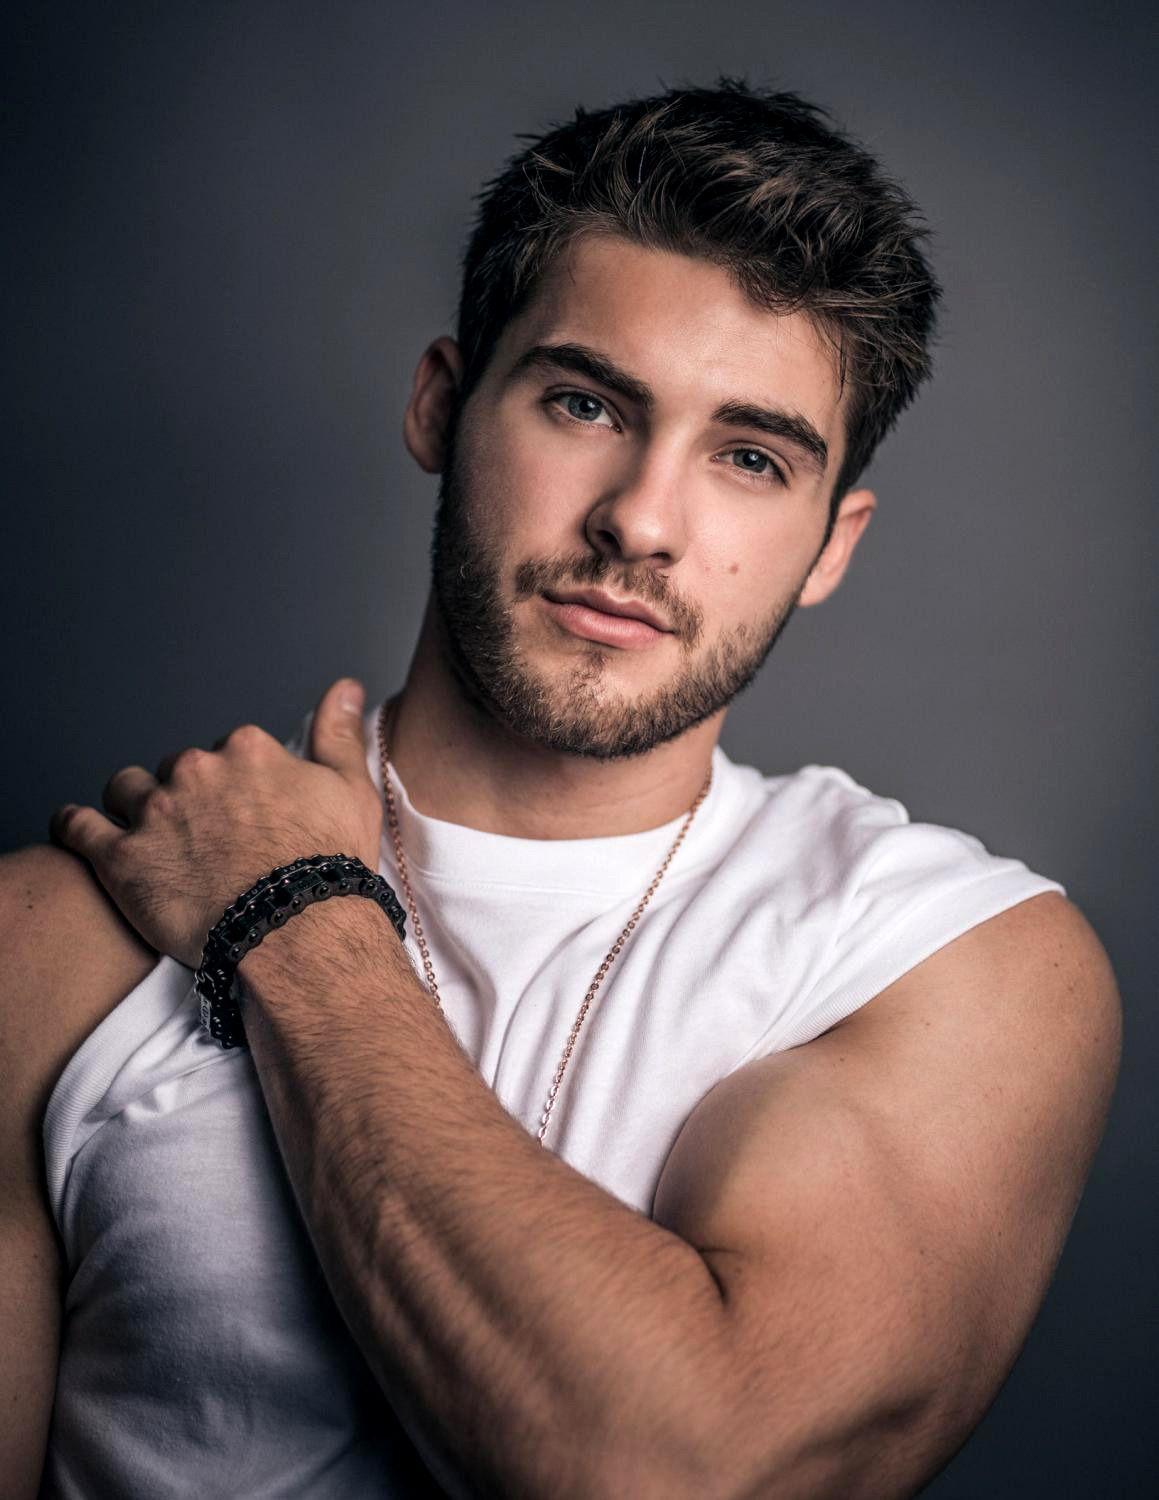 Cody Christian photographed by Arthur Galvao for Bello Mag. Cody